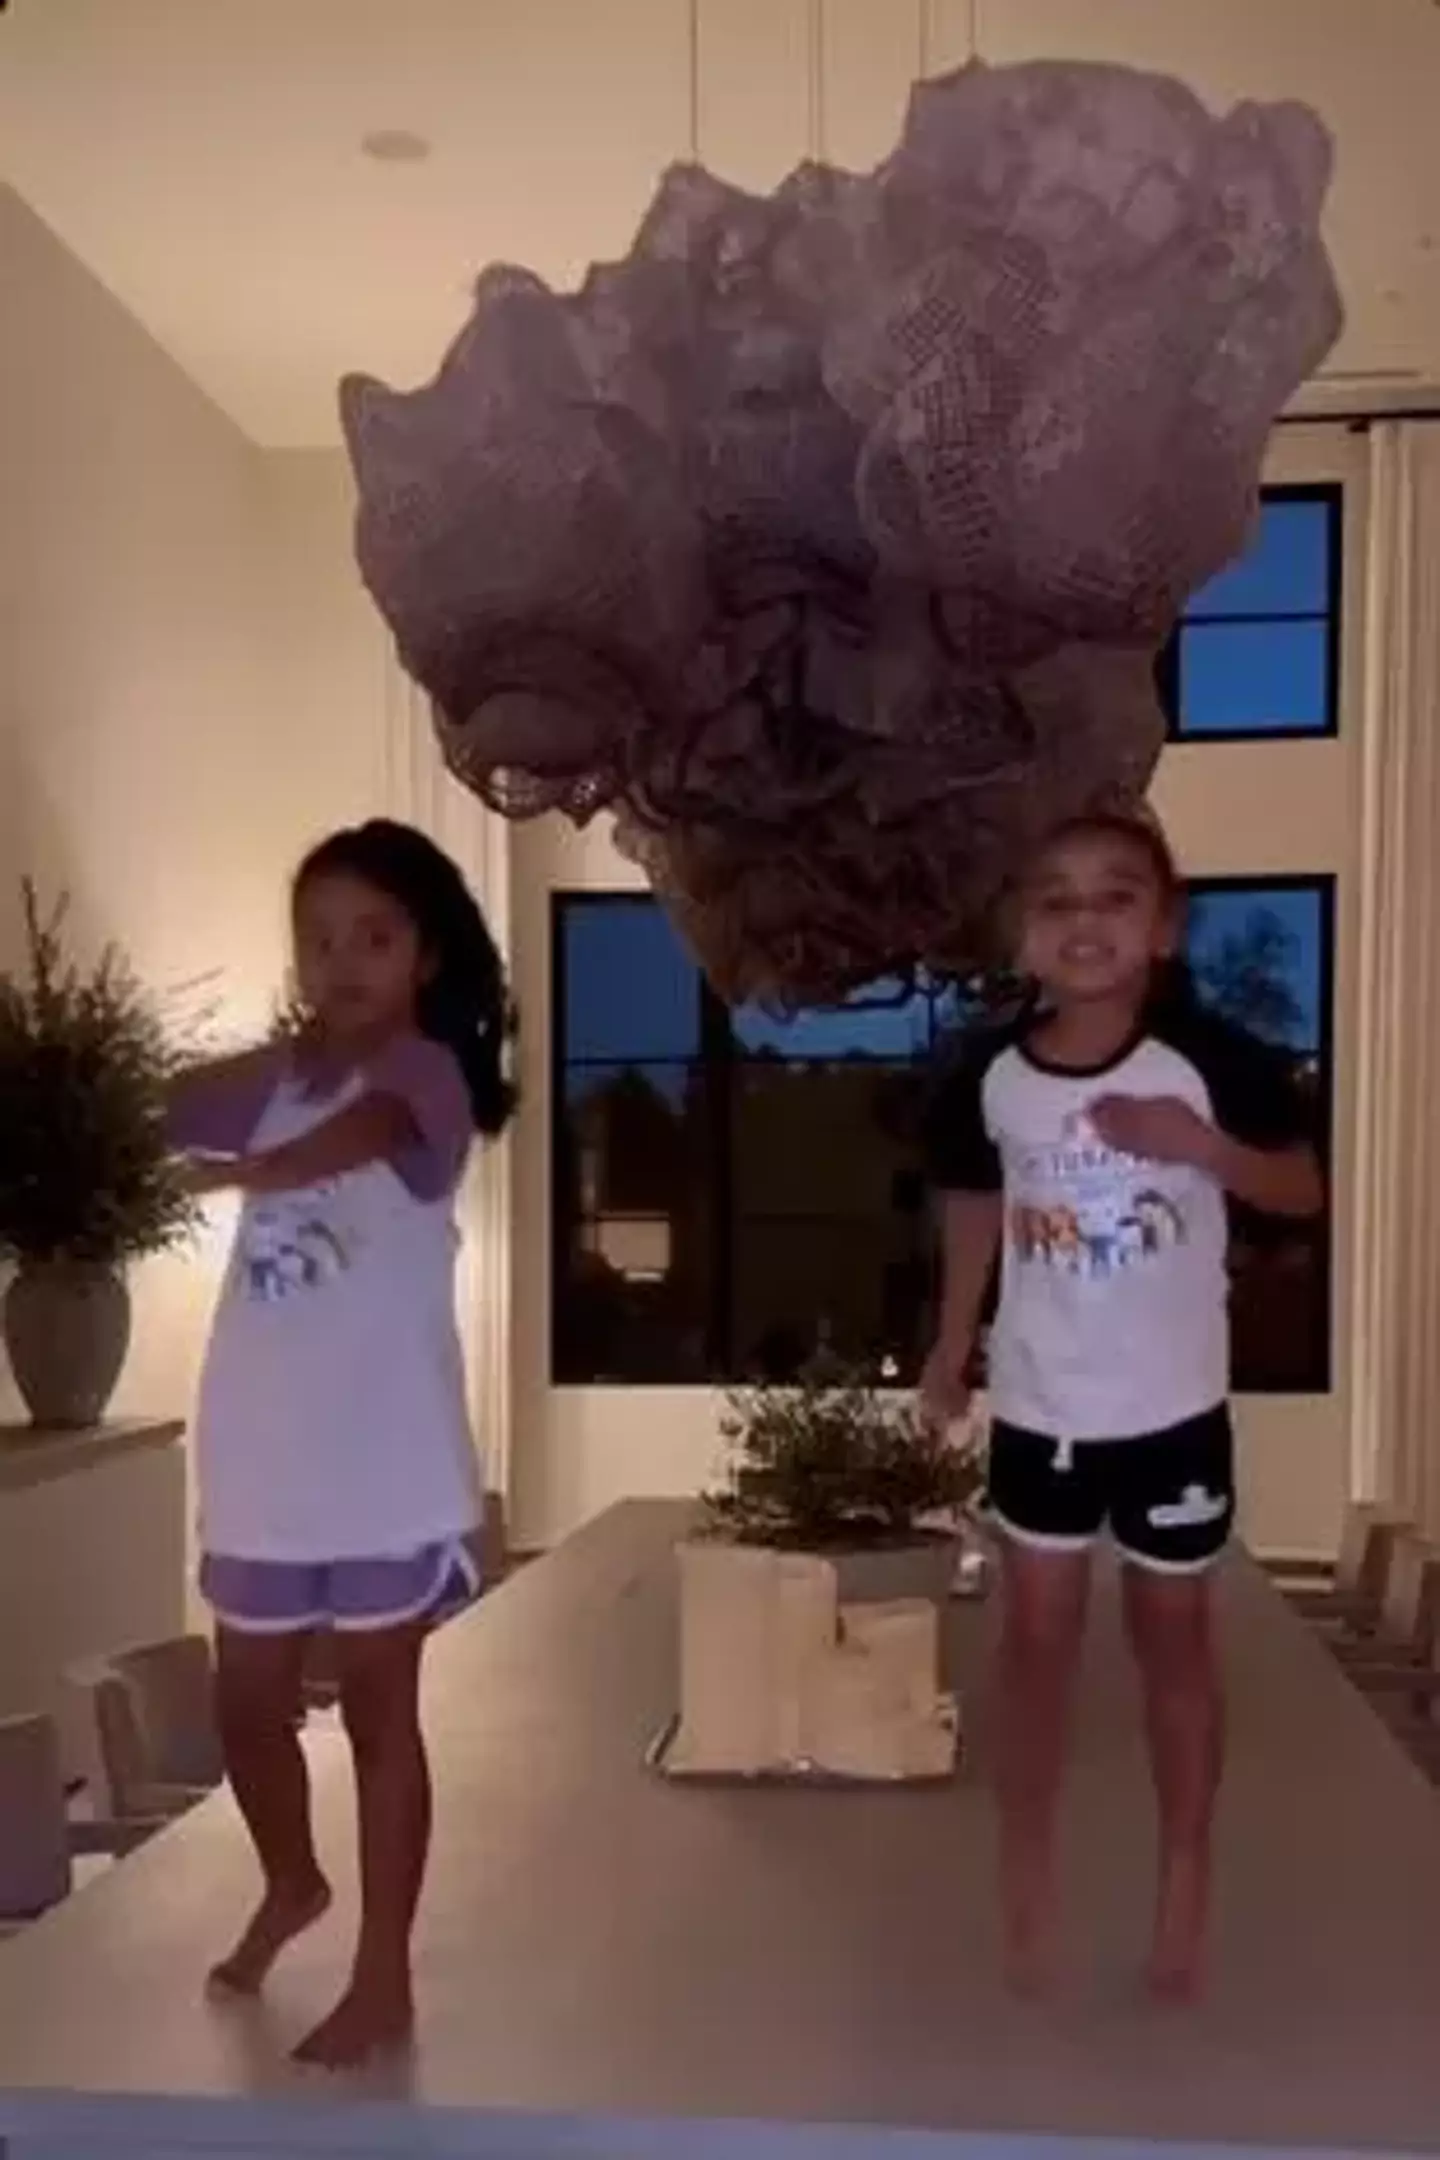 Khloe Kardashian uploaded the video to her Instagram Stories showing her daughter and niece dancing on the table.